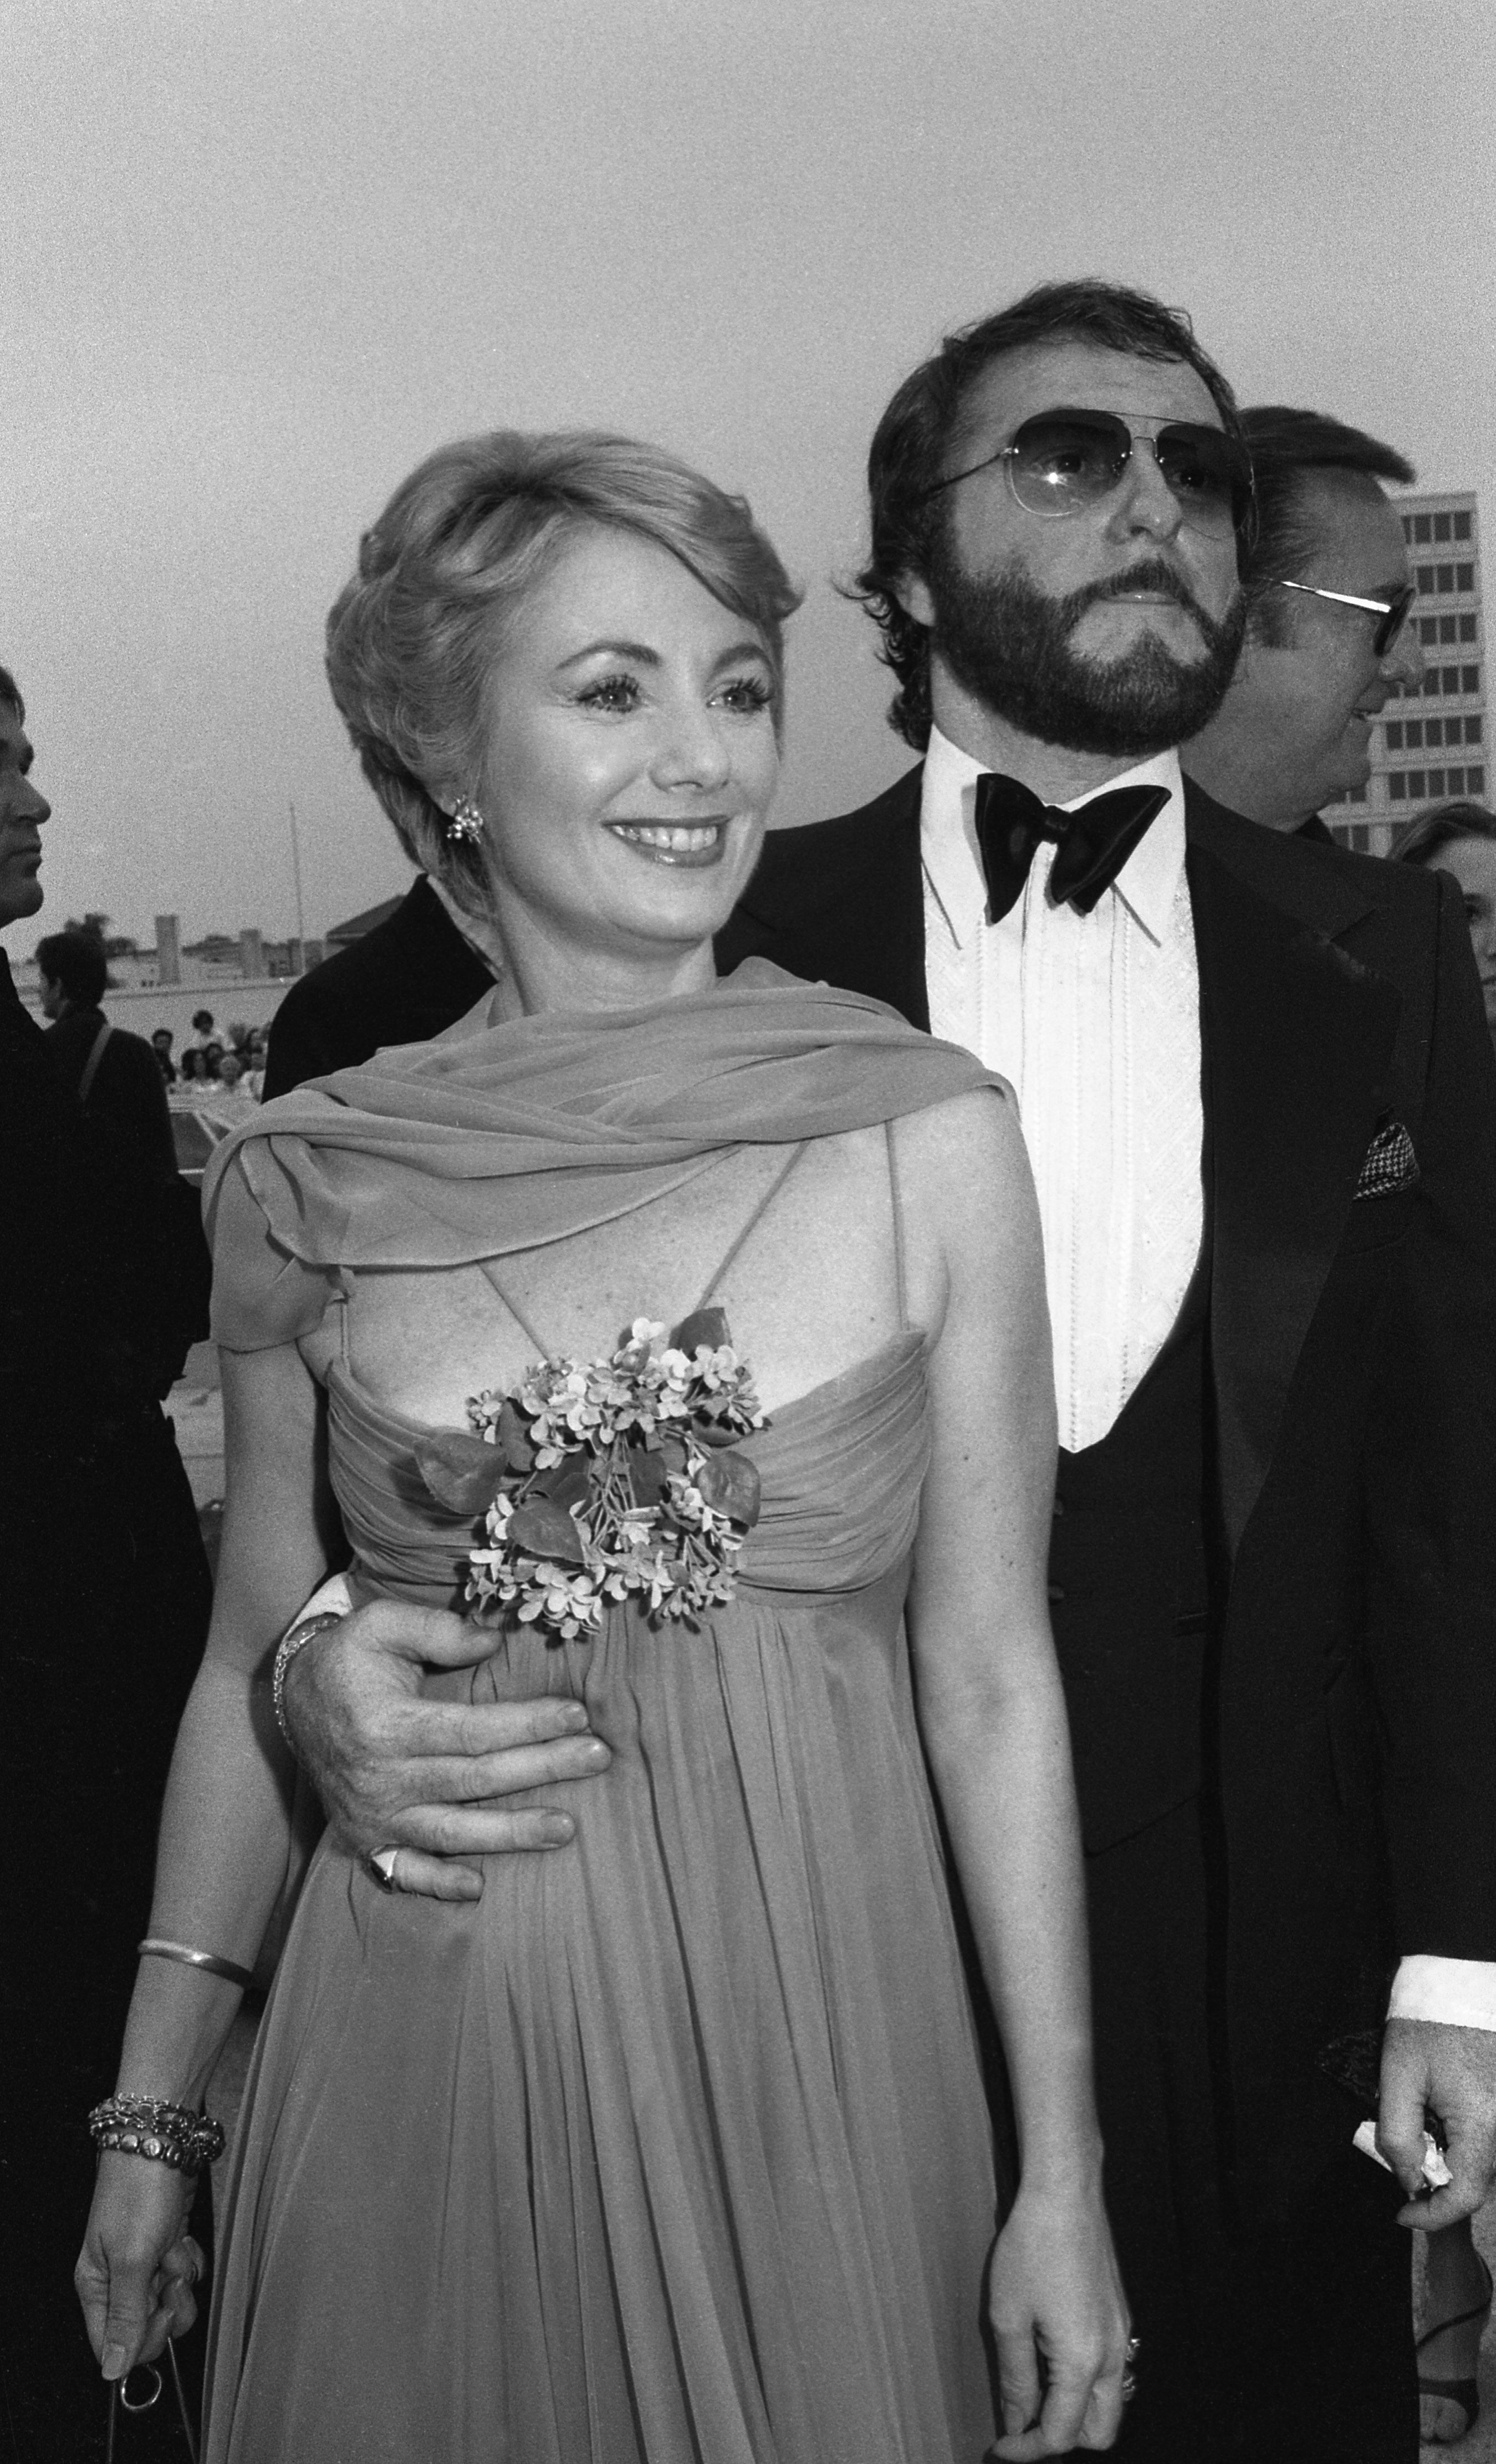 Actress Shirley Jones and comedian Marty Ingles attend the 30th Annual Emmy Awards on September 17, 1978 at the Pasadena Civic Auditorium in Pasadena, California | Source: Getty Images